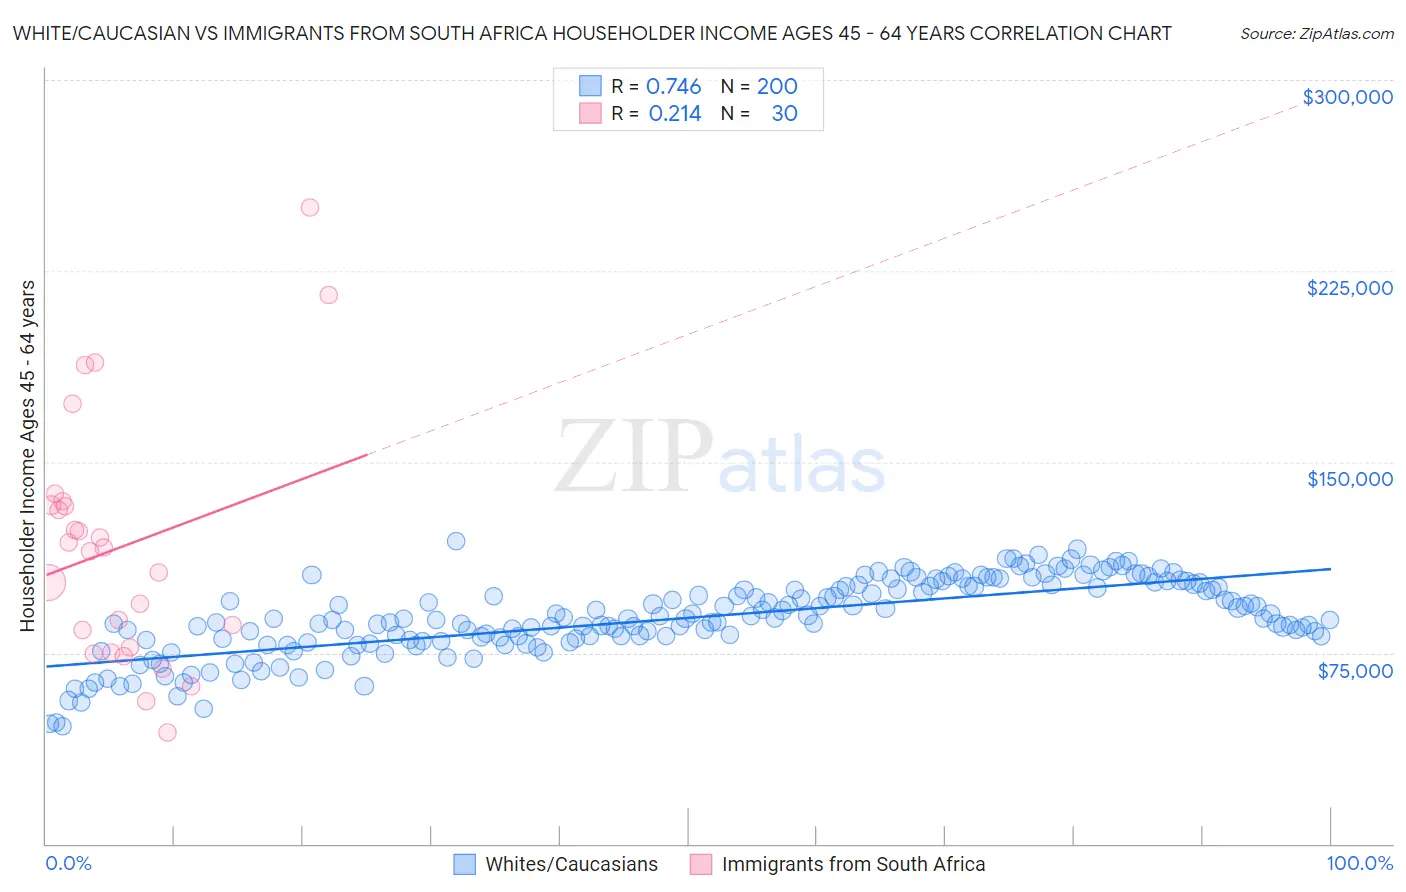 White/Caucasian vs Immigrants from South Africa Householder Income Ages 45 - 64 years